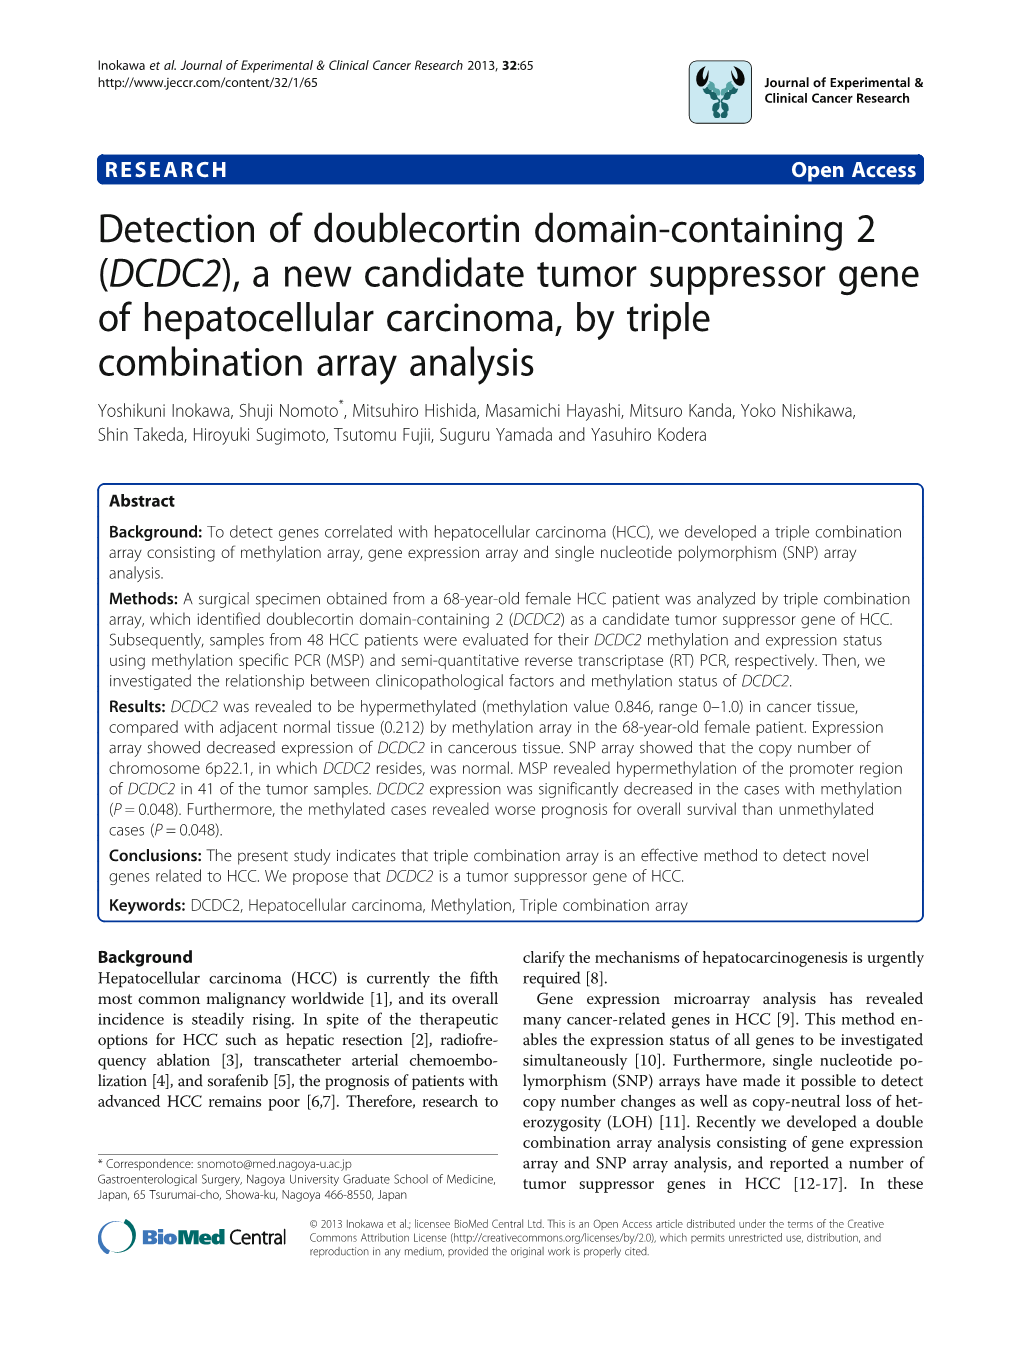 Detection of Doublecortin Domain-Containing 2 (DCDC2), A